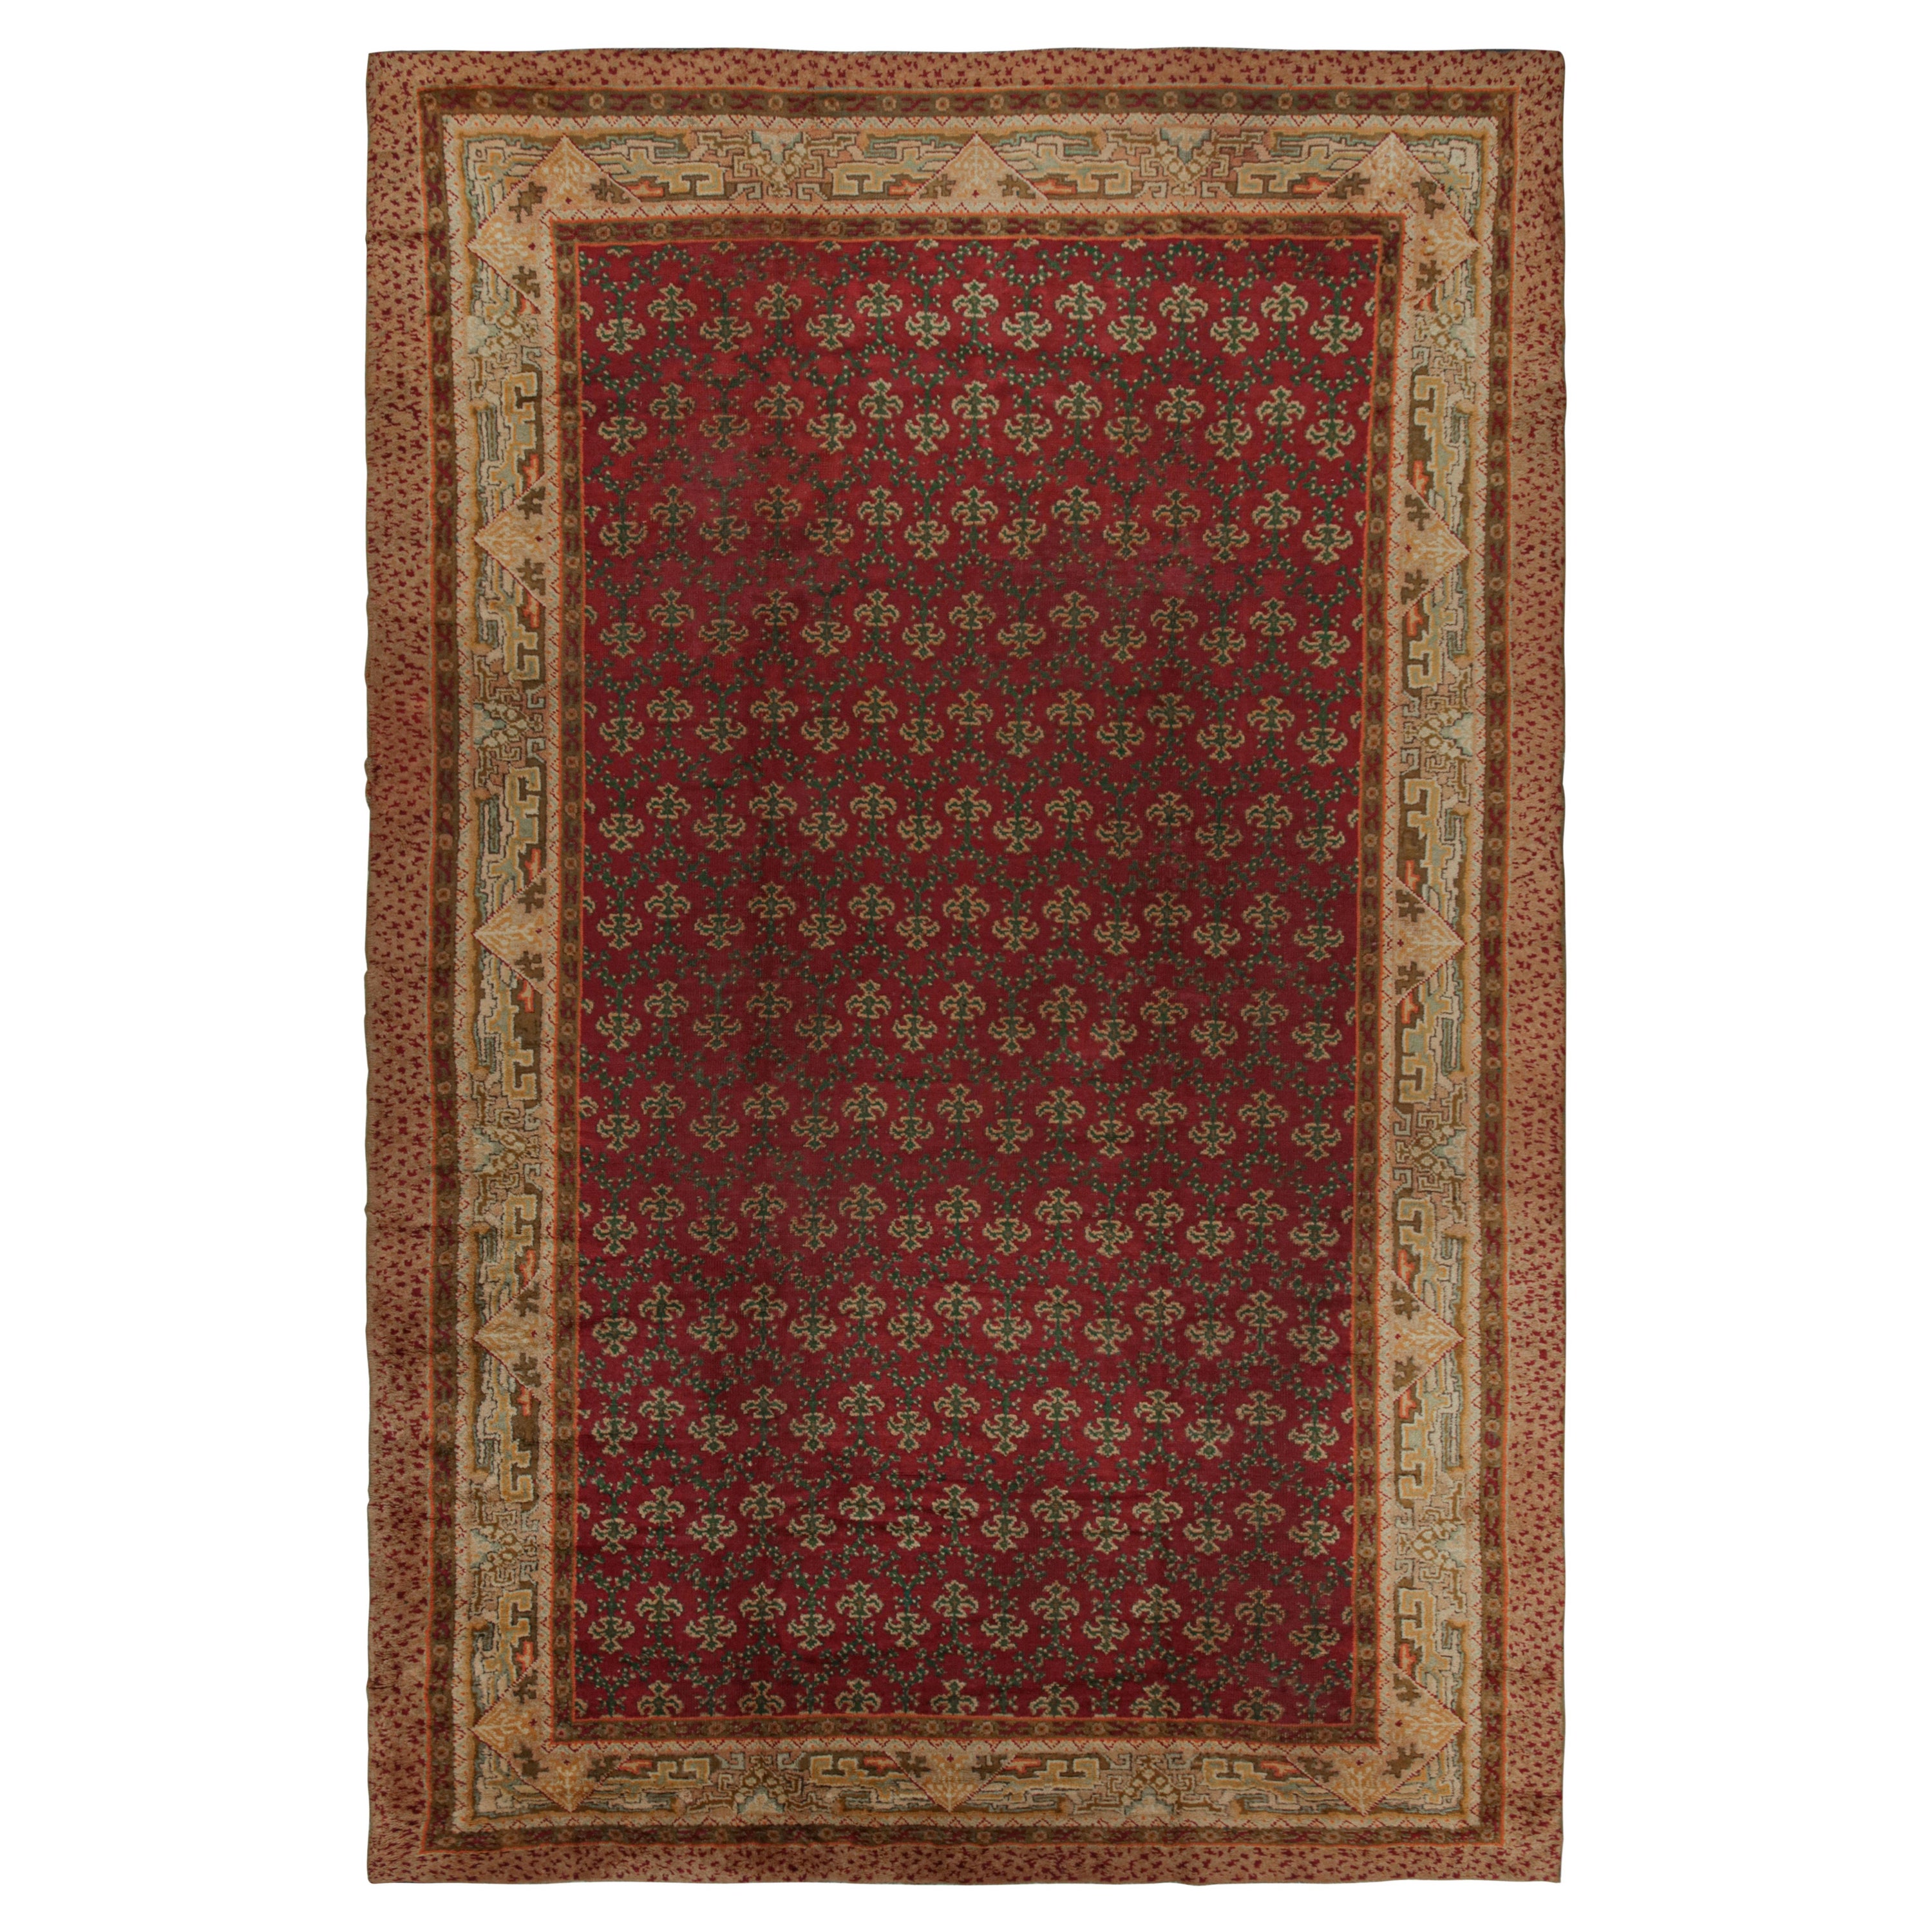 Oversized Antique Axminster Rug in Red with Green Patterns For Sale